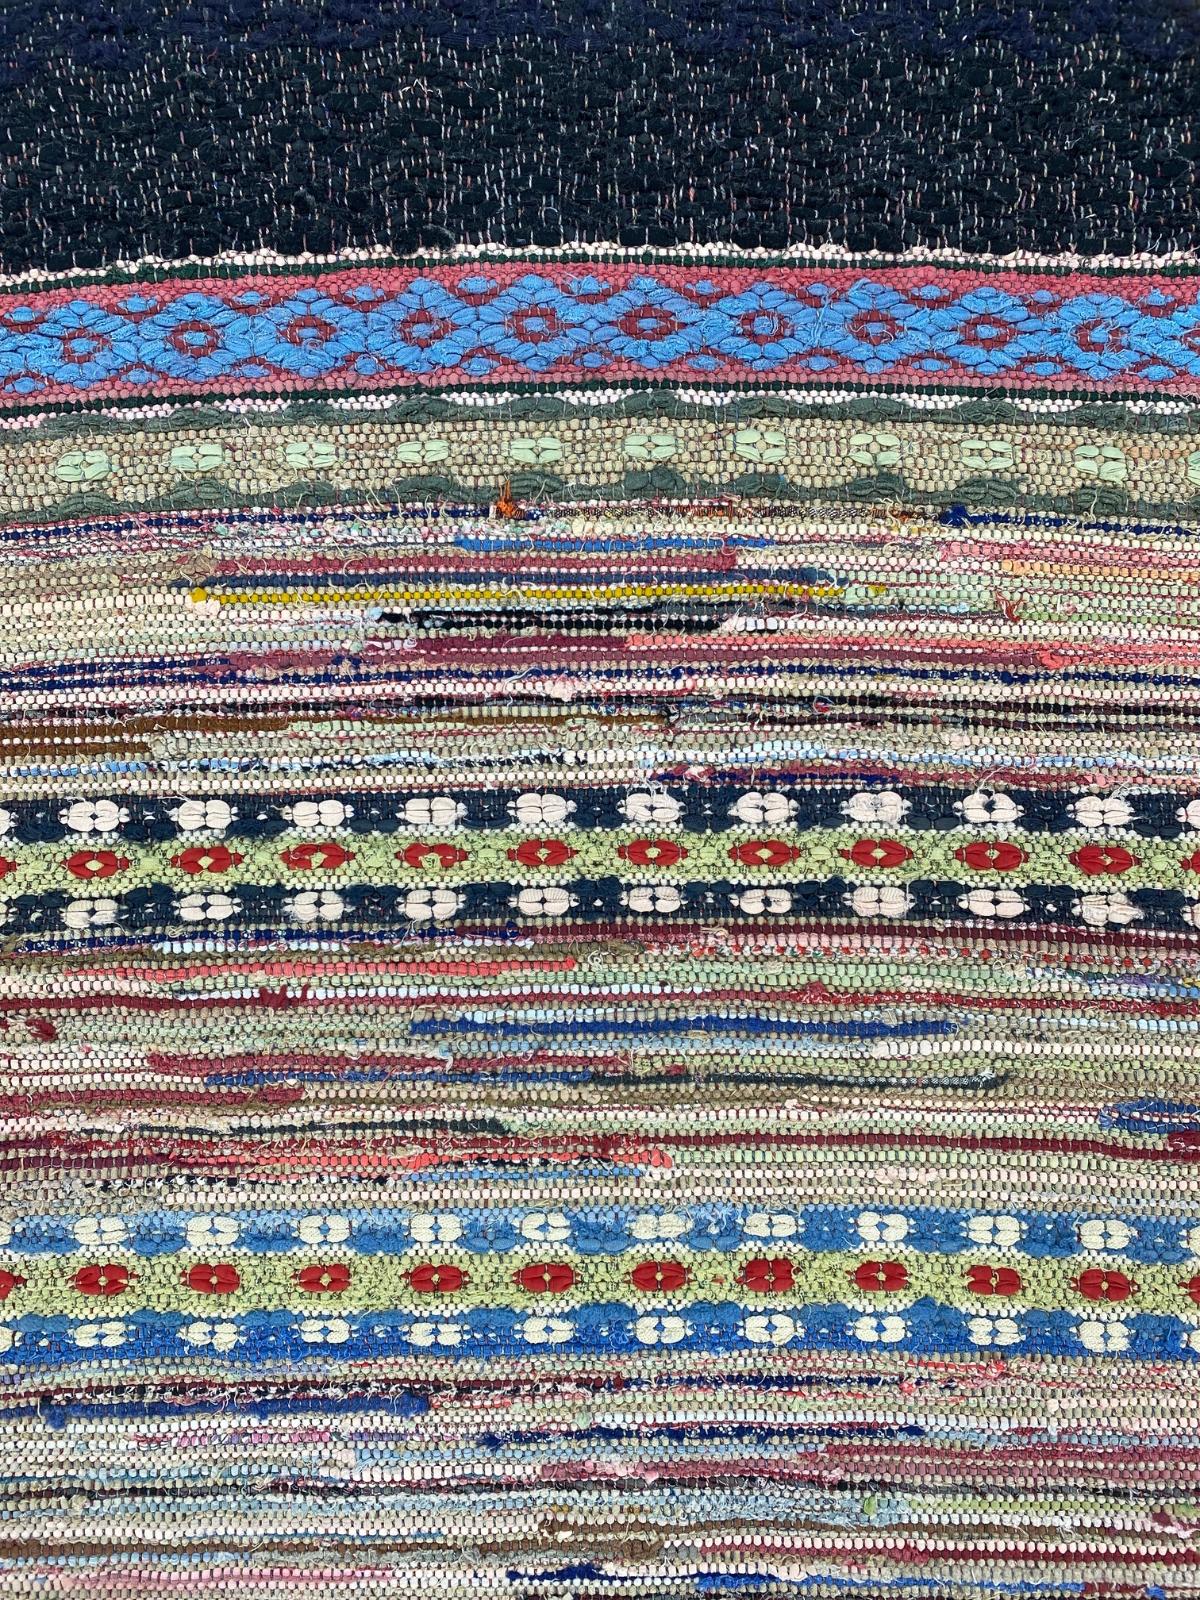 A fantastic Swedish rag rug, woven by hand in the late 1950´s in Alvesta, Småland,  Sweden.  Woven by Jenny Andersson in the late 1950´s. It´s in good condition, rarely used!

Machine washable at 40 degrees.

Swedish rag rugs are part of Swedish